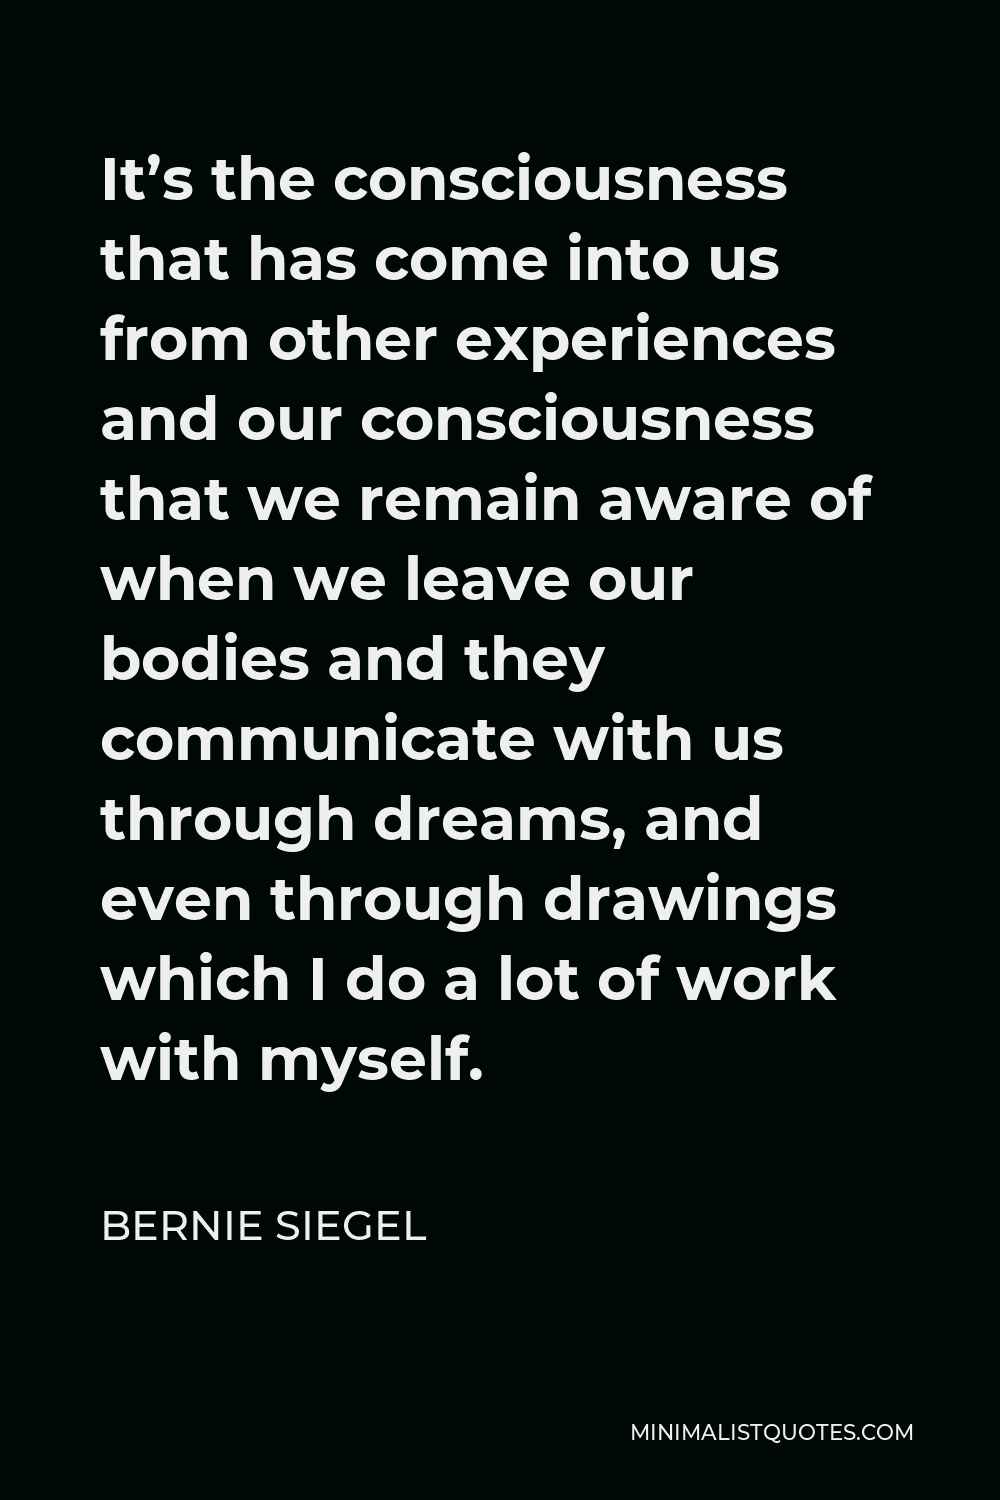 Bernie Siegel Quote - It’s the consciousness that has come into us from other experiences and our consciousness that we remain aware of when we leave our bodies and they communicate with us through dreams, and even through drawings which I do a lot of work with myself.